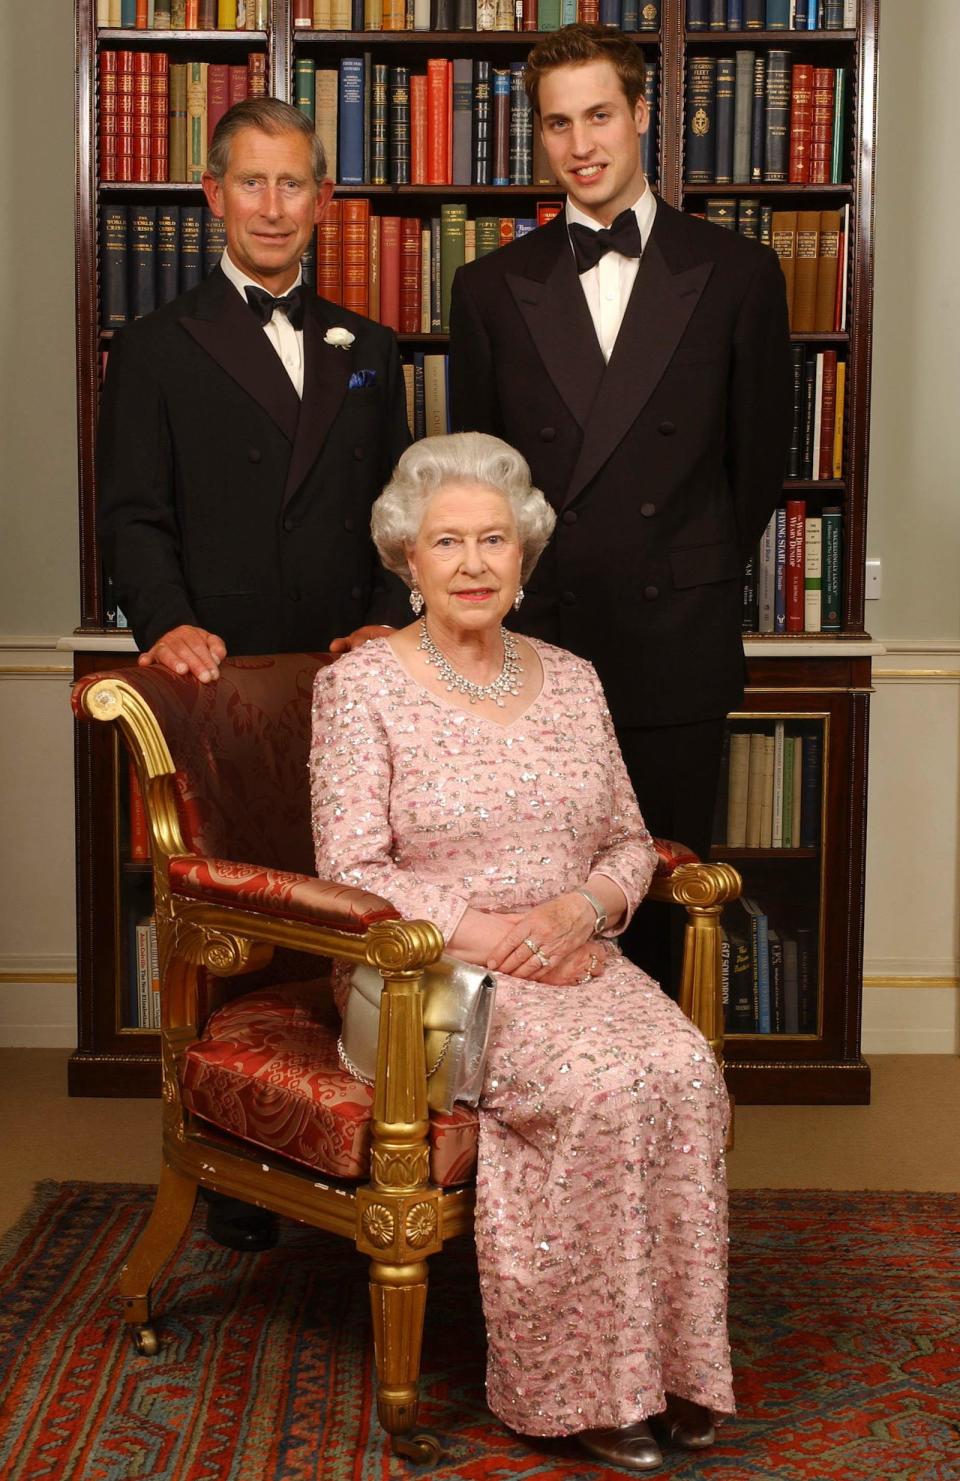 BRITAIN QUEEN CORONATION Three generations of the British Royal family - Queen Elizabeth II, her eldest son, the Prince of Wales, Charles, left, and his eldest son, Prince William, pose for a photograph at Clarence House in London, Monday, June 2, 2003, before a dinner to mark the 50th anniversary of her Coronation. The Prince of Wales was hosting the meal at his new residence, formerly the London home of the late Queen Mother.